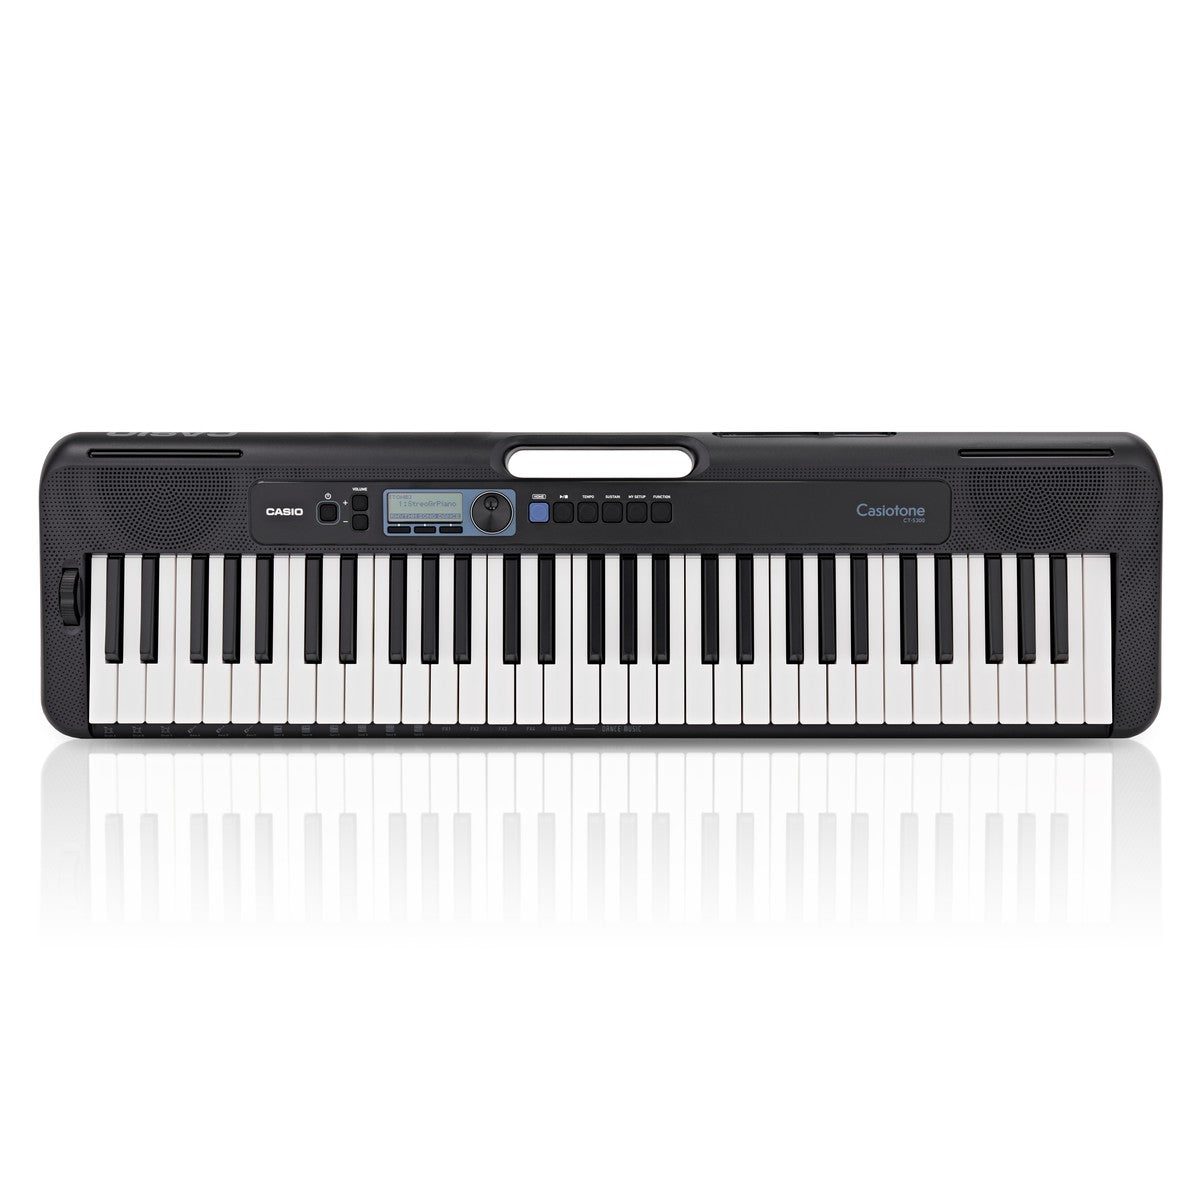 Casio CT-S300 Keyboard with Accessory Pack